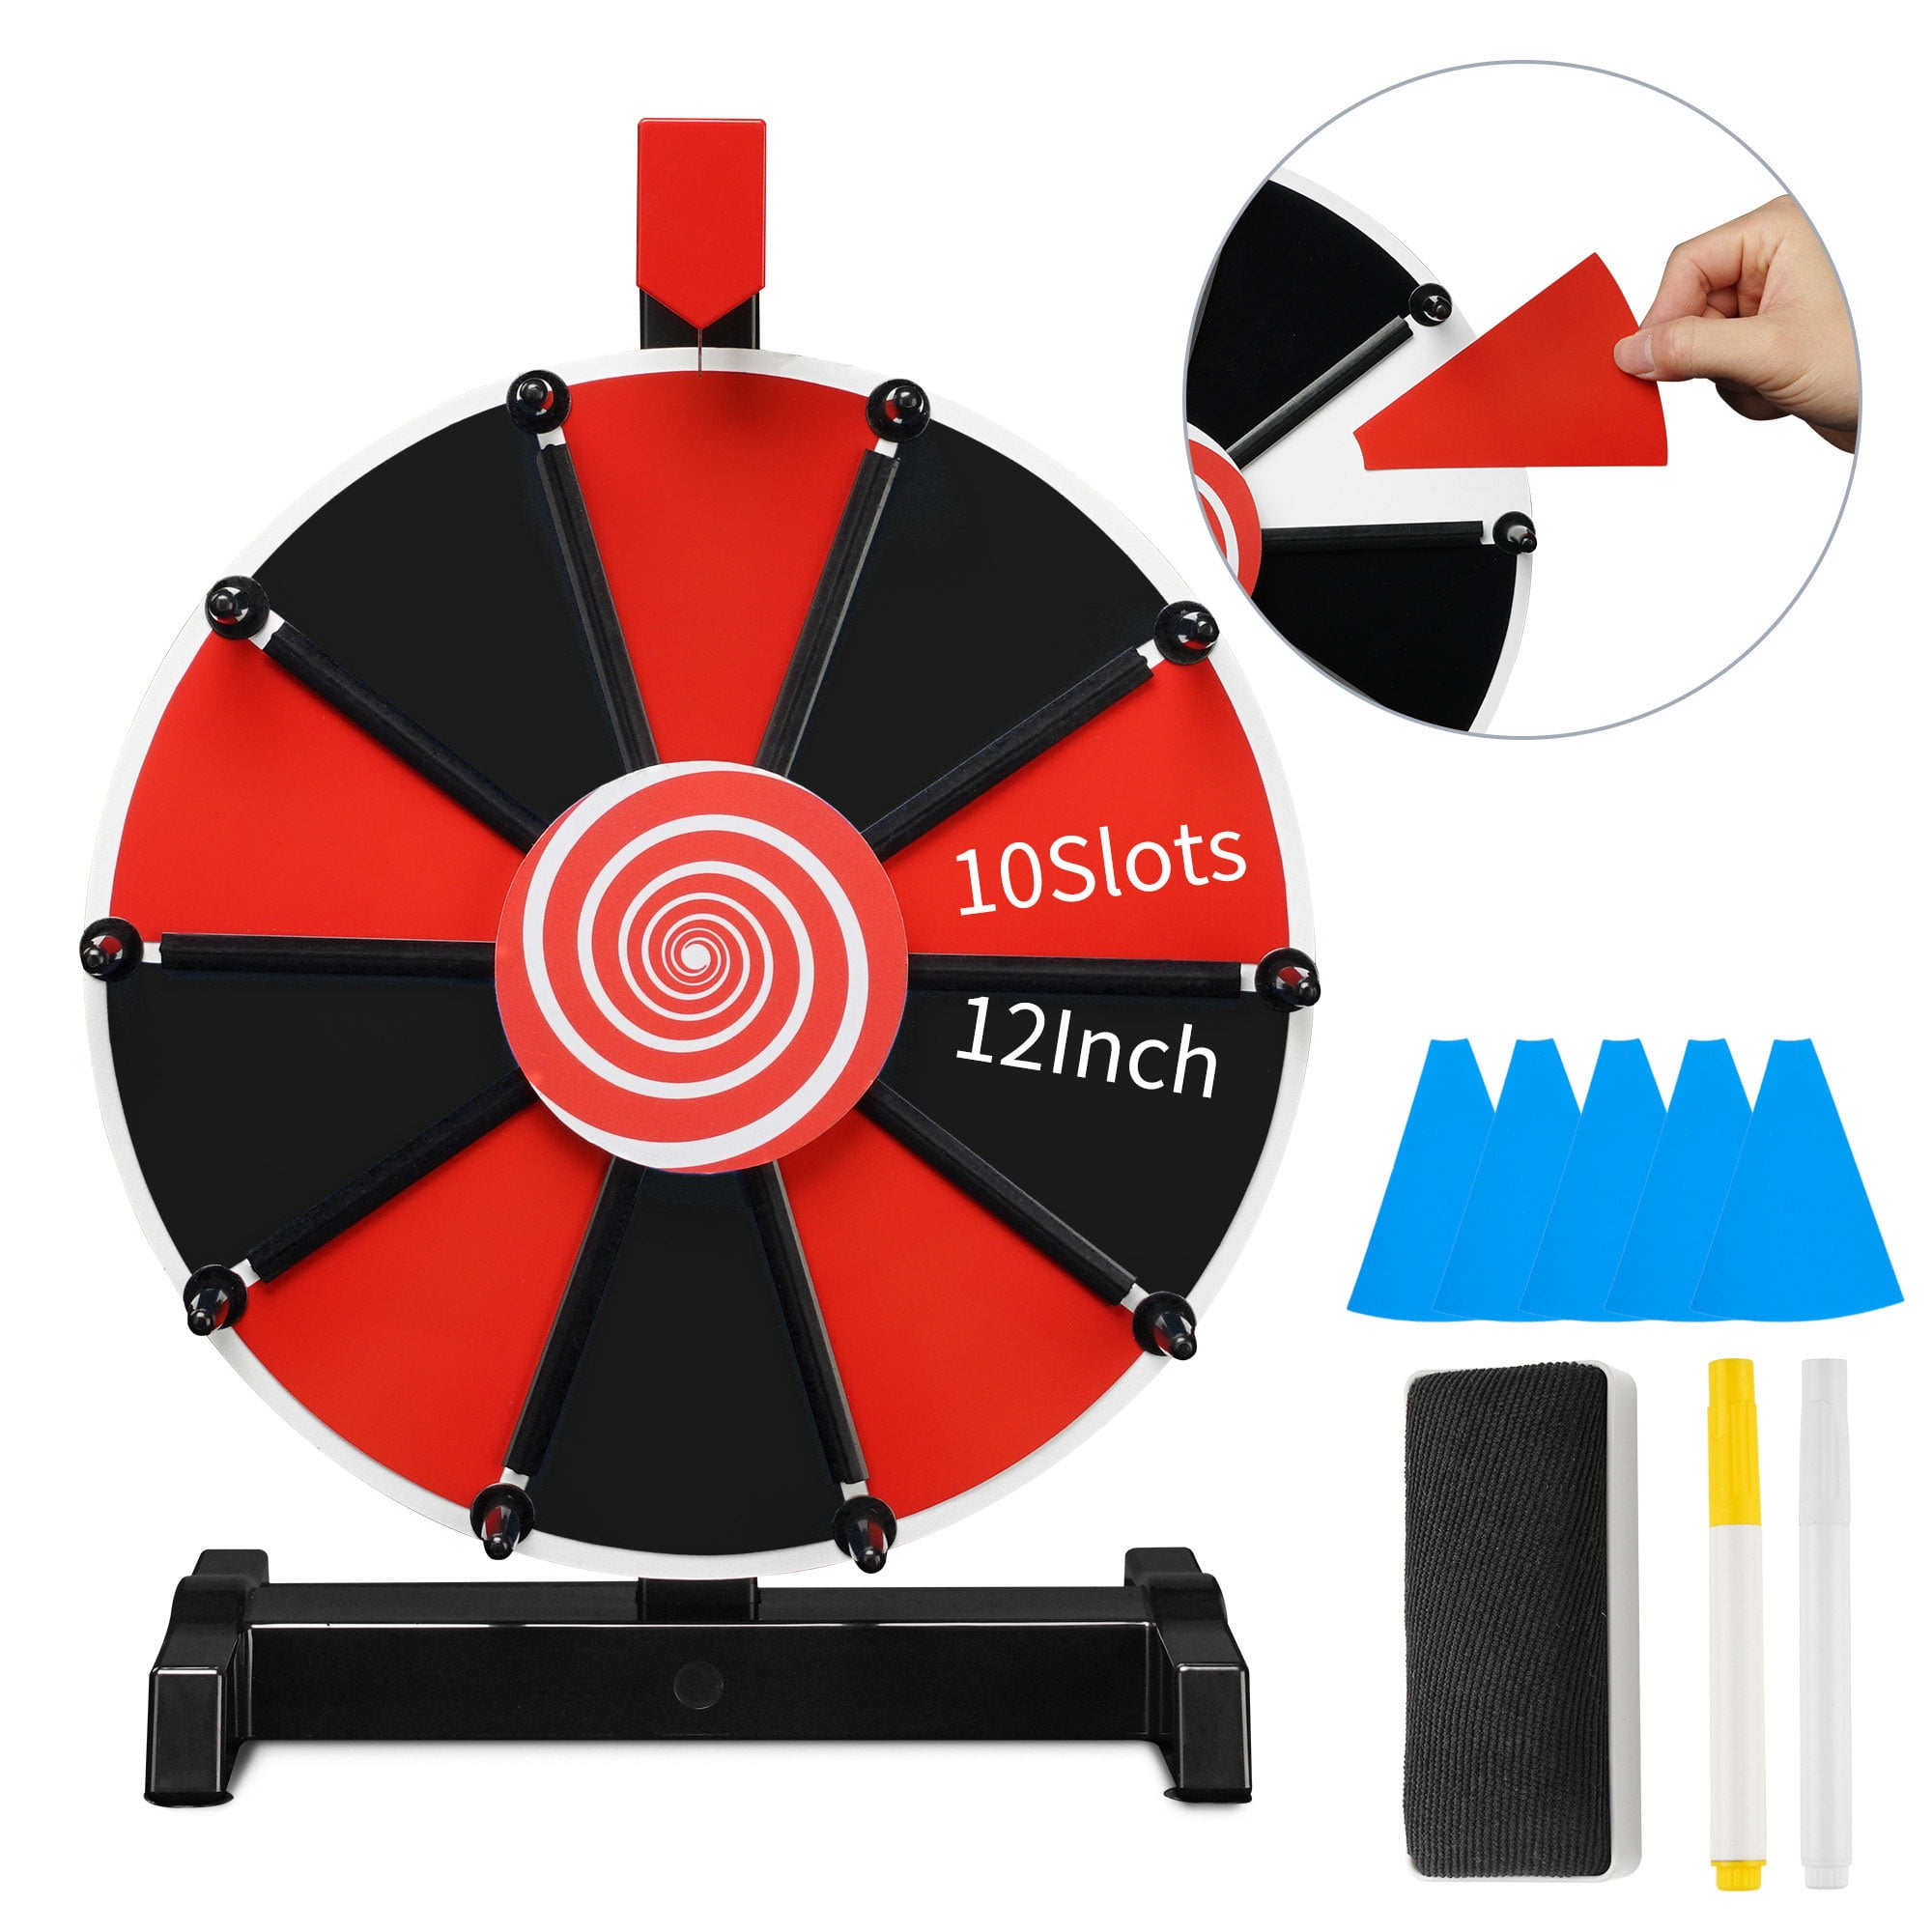 JungleA 24 inch Tabletop Spinning Prize Wheel Spinner 14 Slots Color Customized Carnival Fortune Spinner Game with Editable Dry Erase Marker Pen for Party Trade Show 